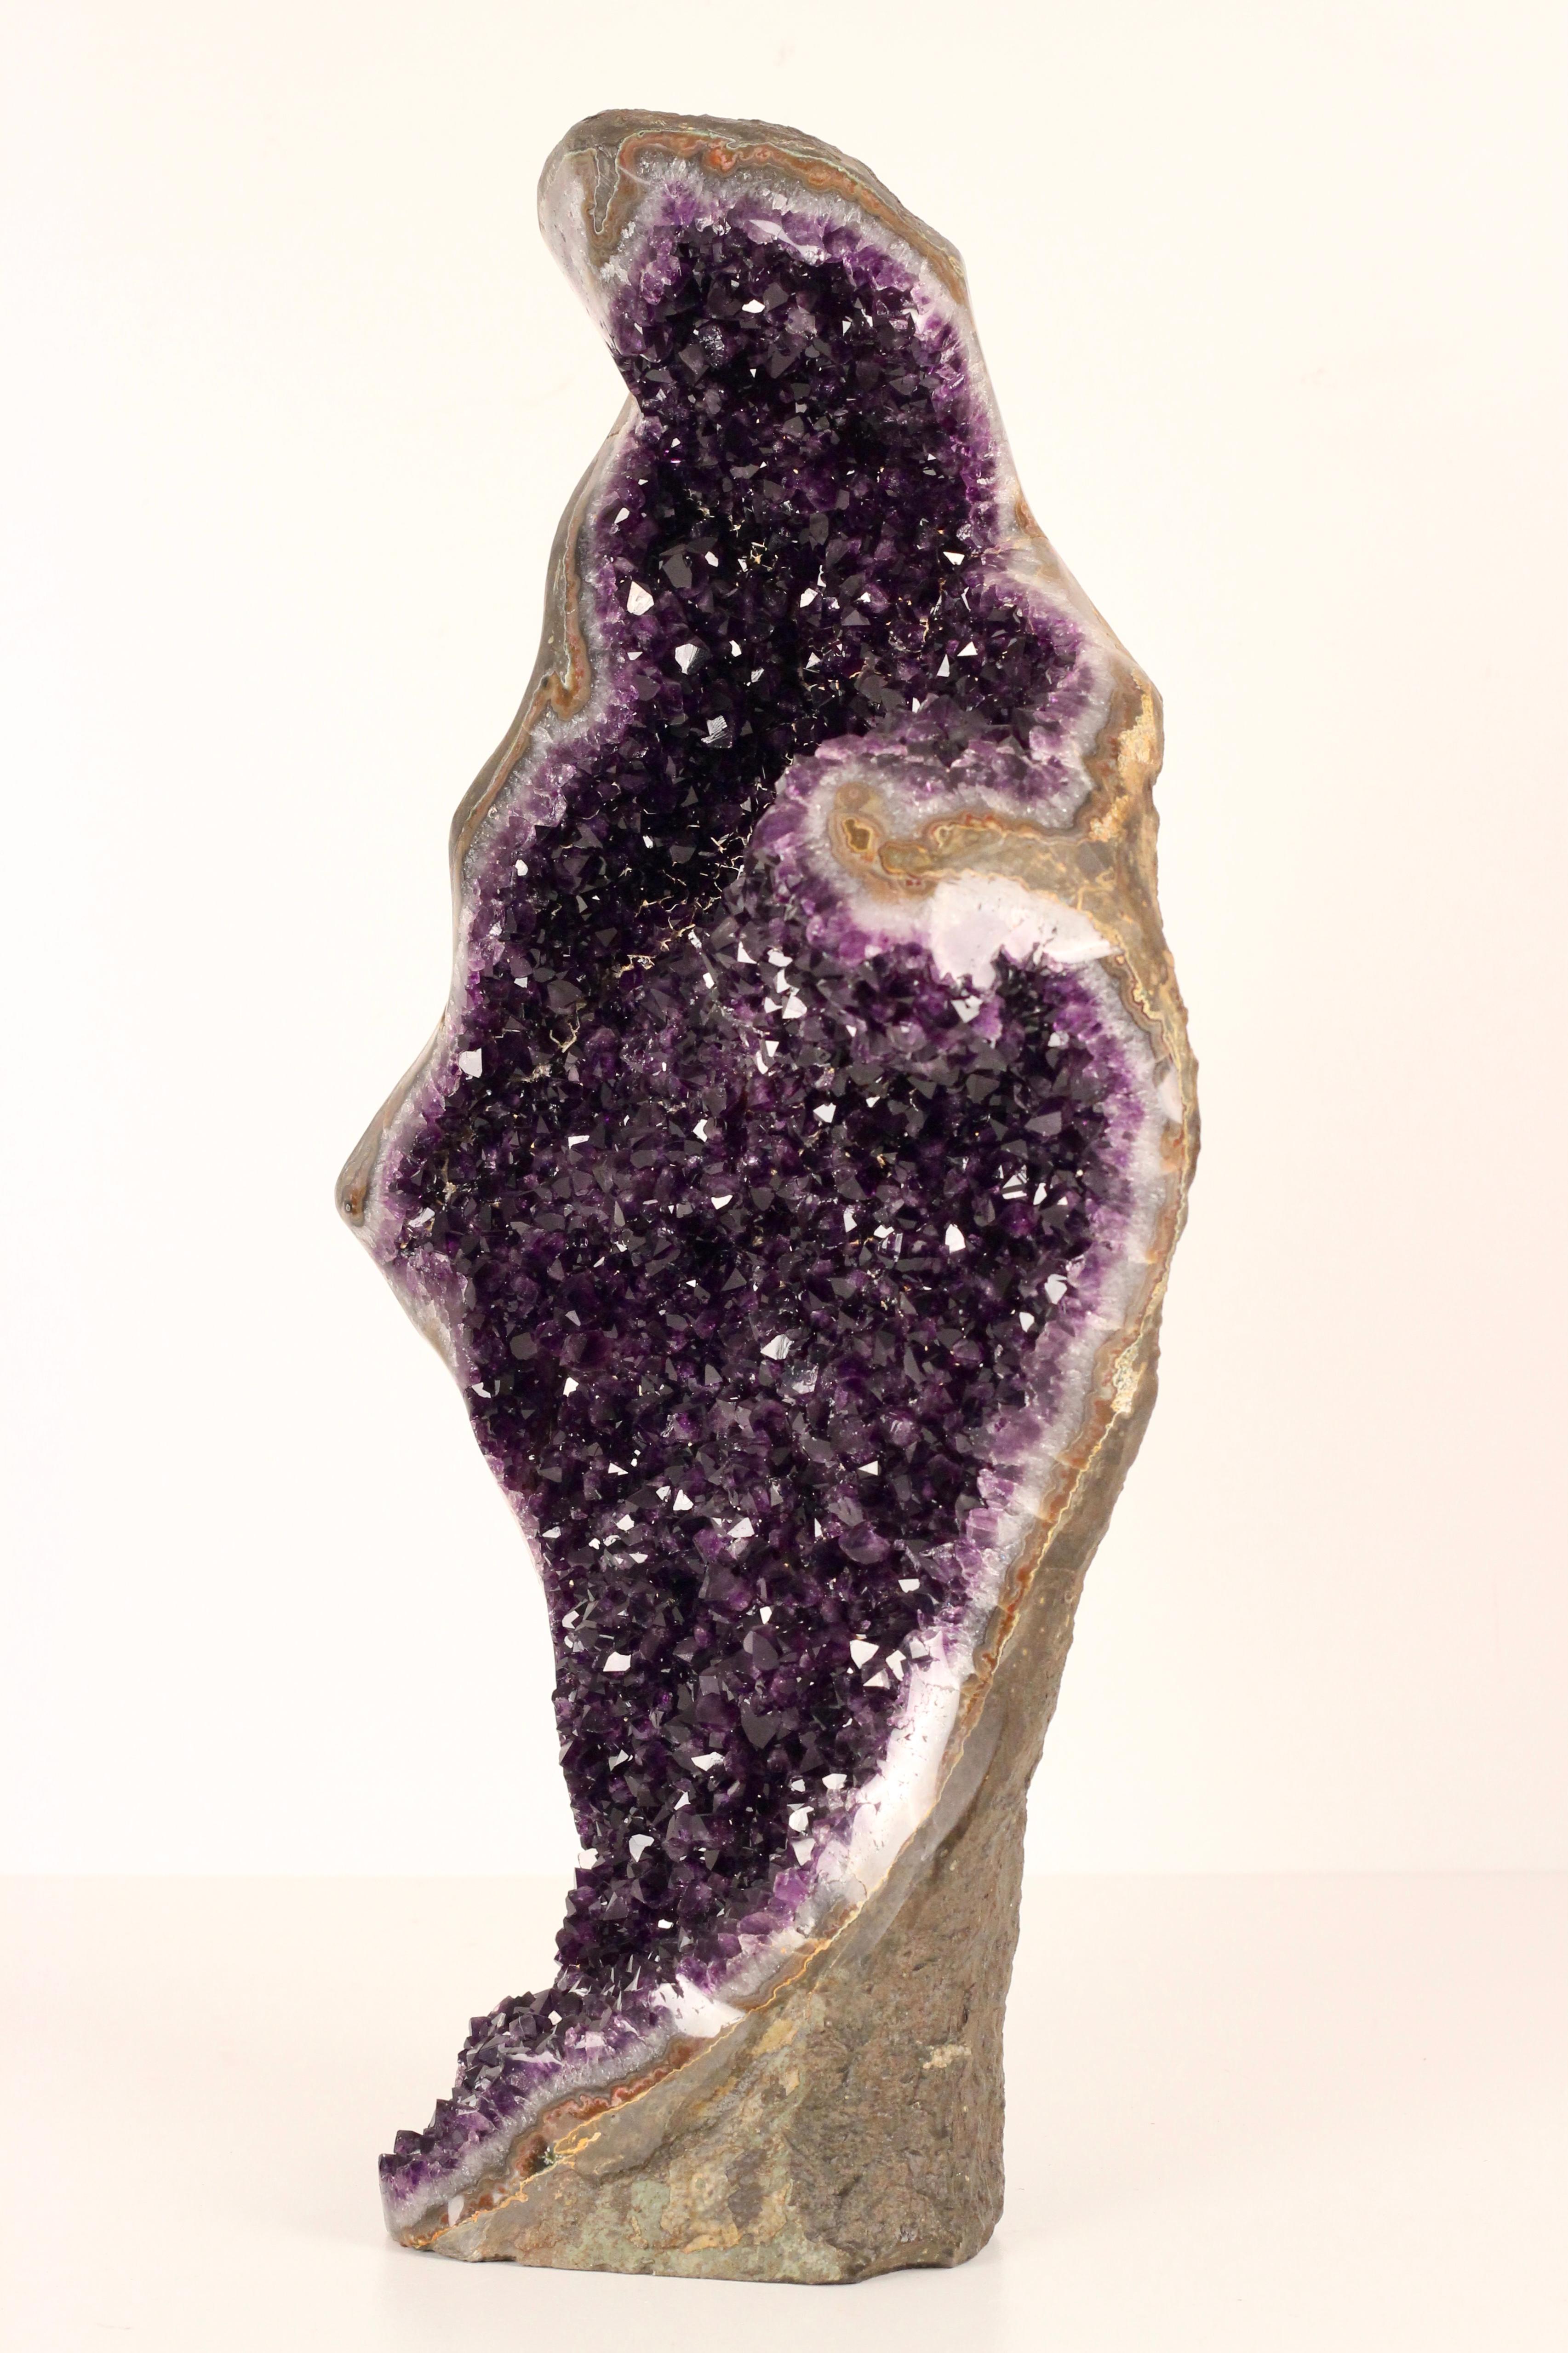 This Gem grade, Amethyst Geode crystal Sculpture, resembles in shape and silhouette that of a shrouded woman holding a swaddled baby. And would work well in a Boho Chic Styled Interior. The Geode originates from Uruguay where they are mined from the